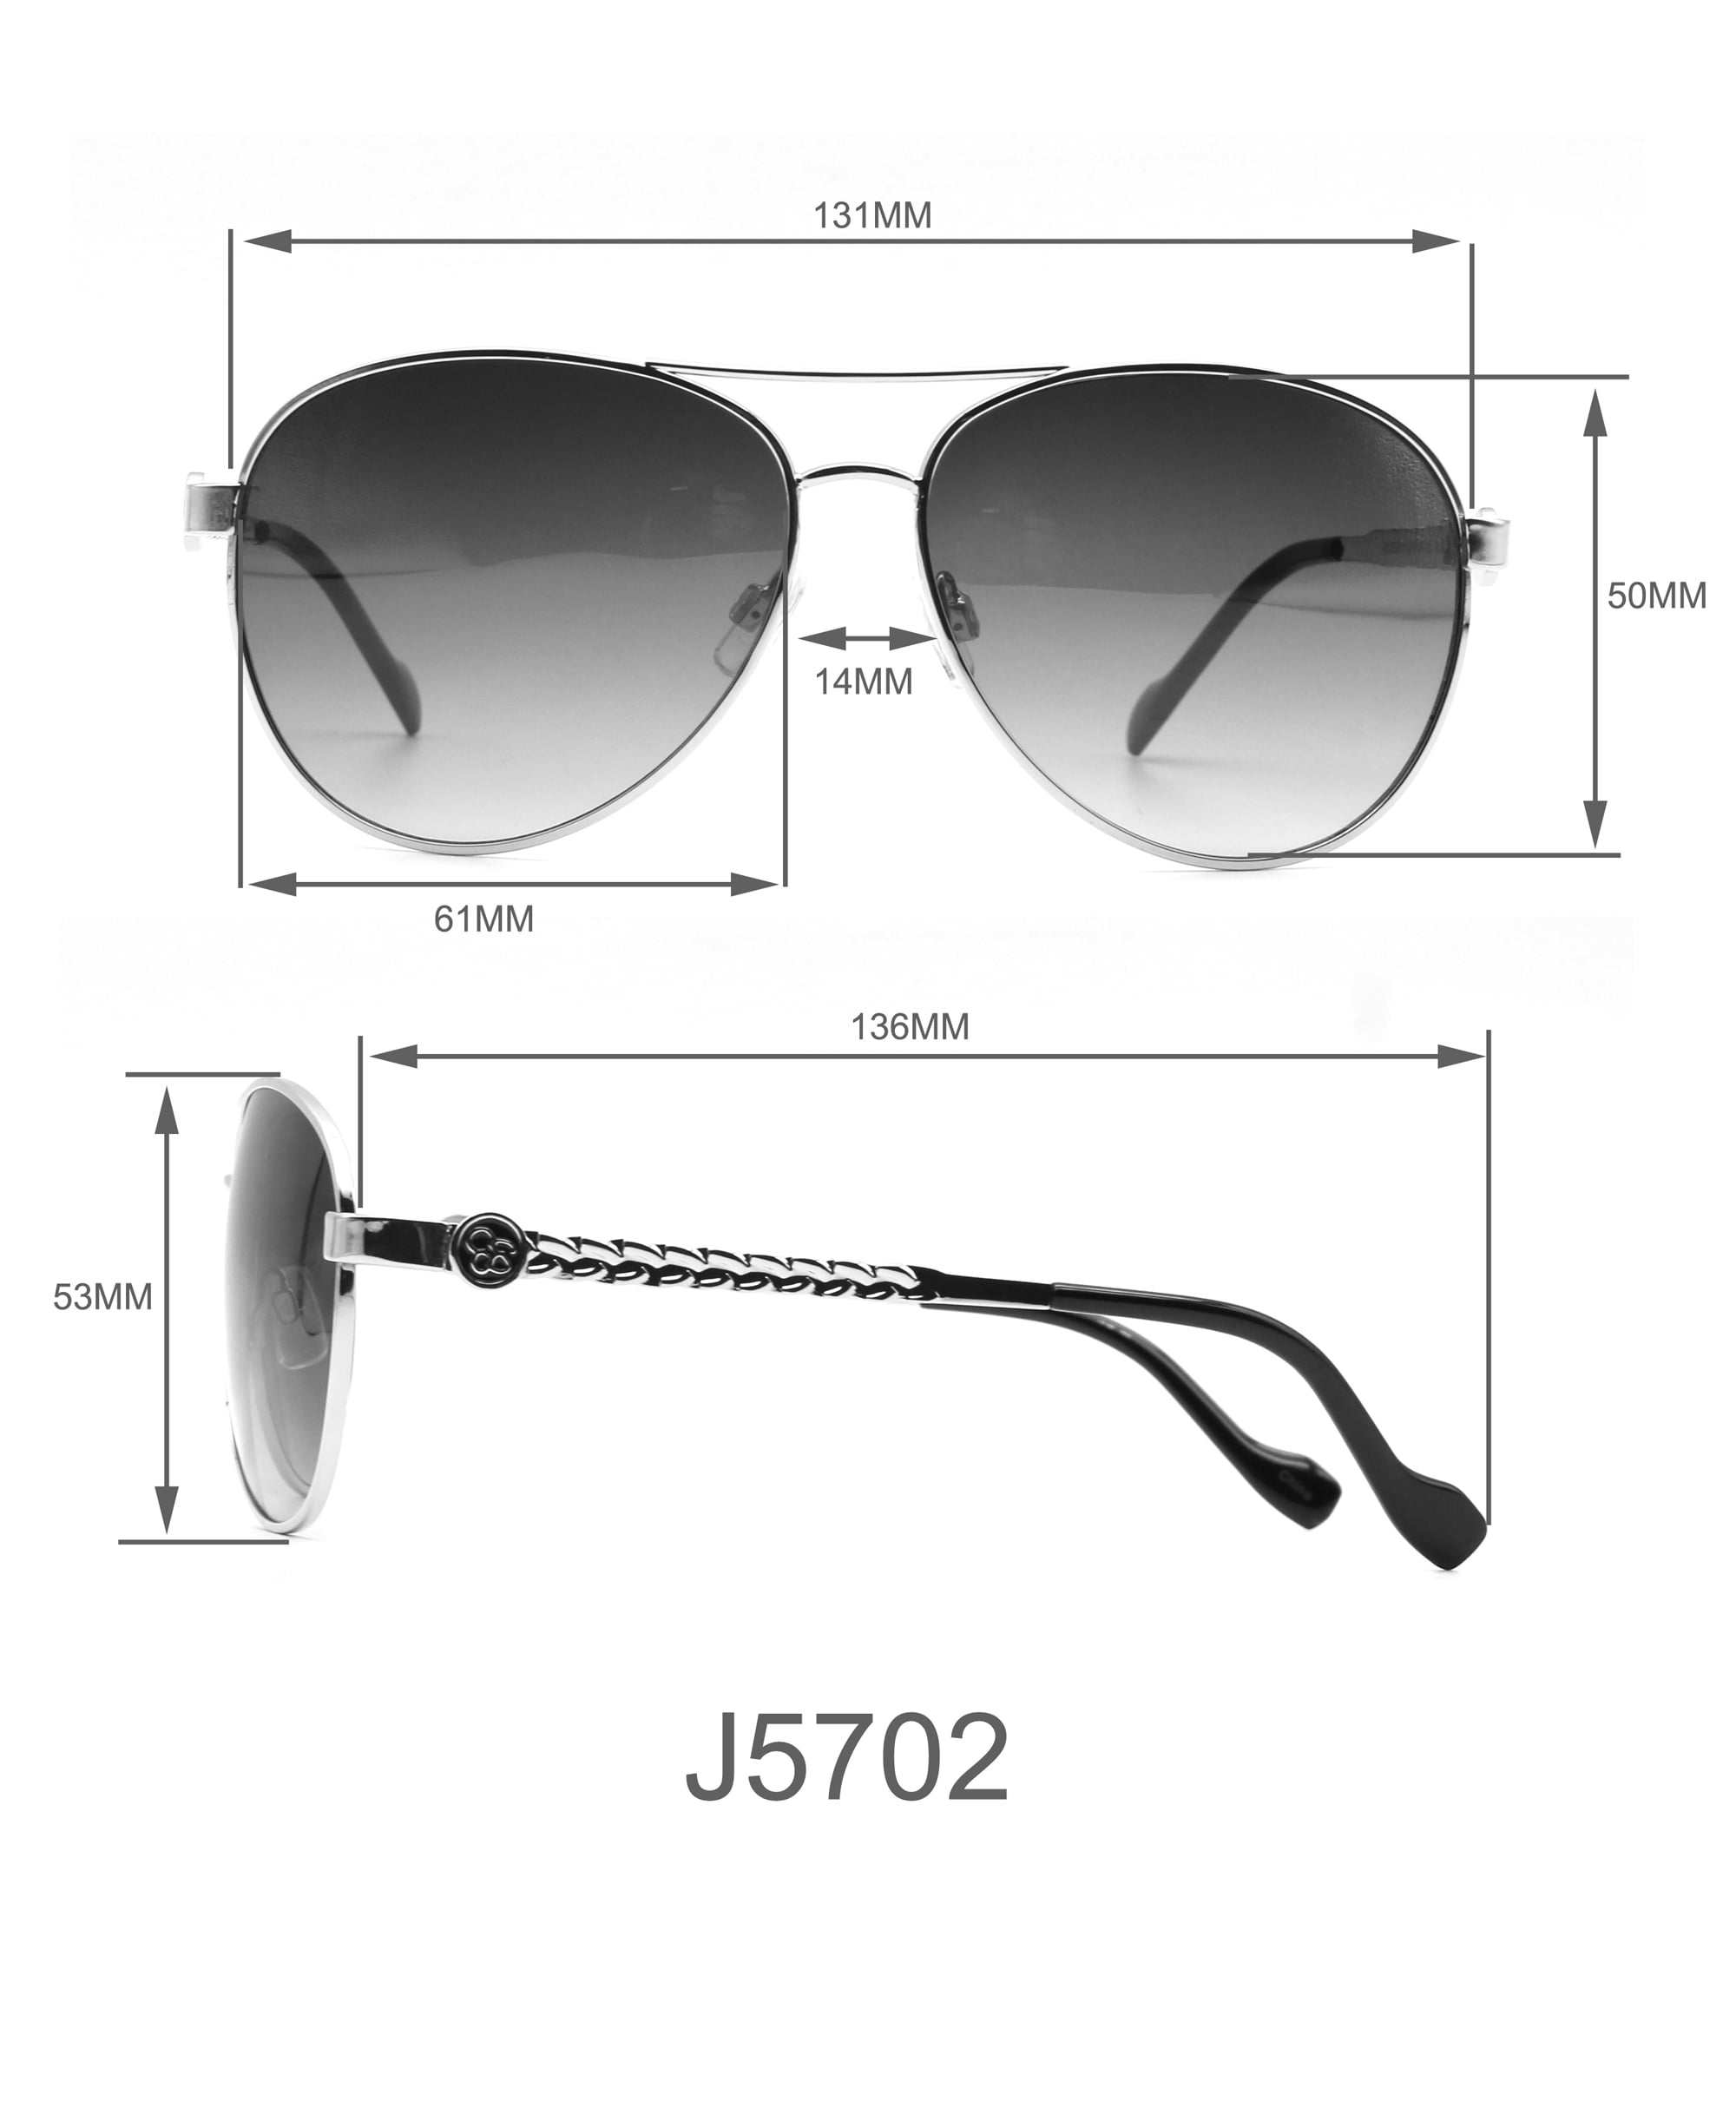 Jessica Simpson J5702 Metal UV400 Protective Aviator Sunglasses for Women.  Glam Gifts for Her, 61 mm